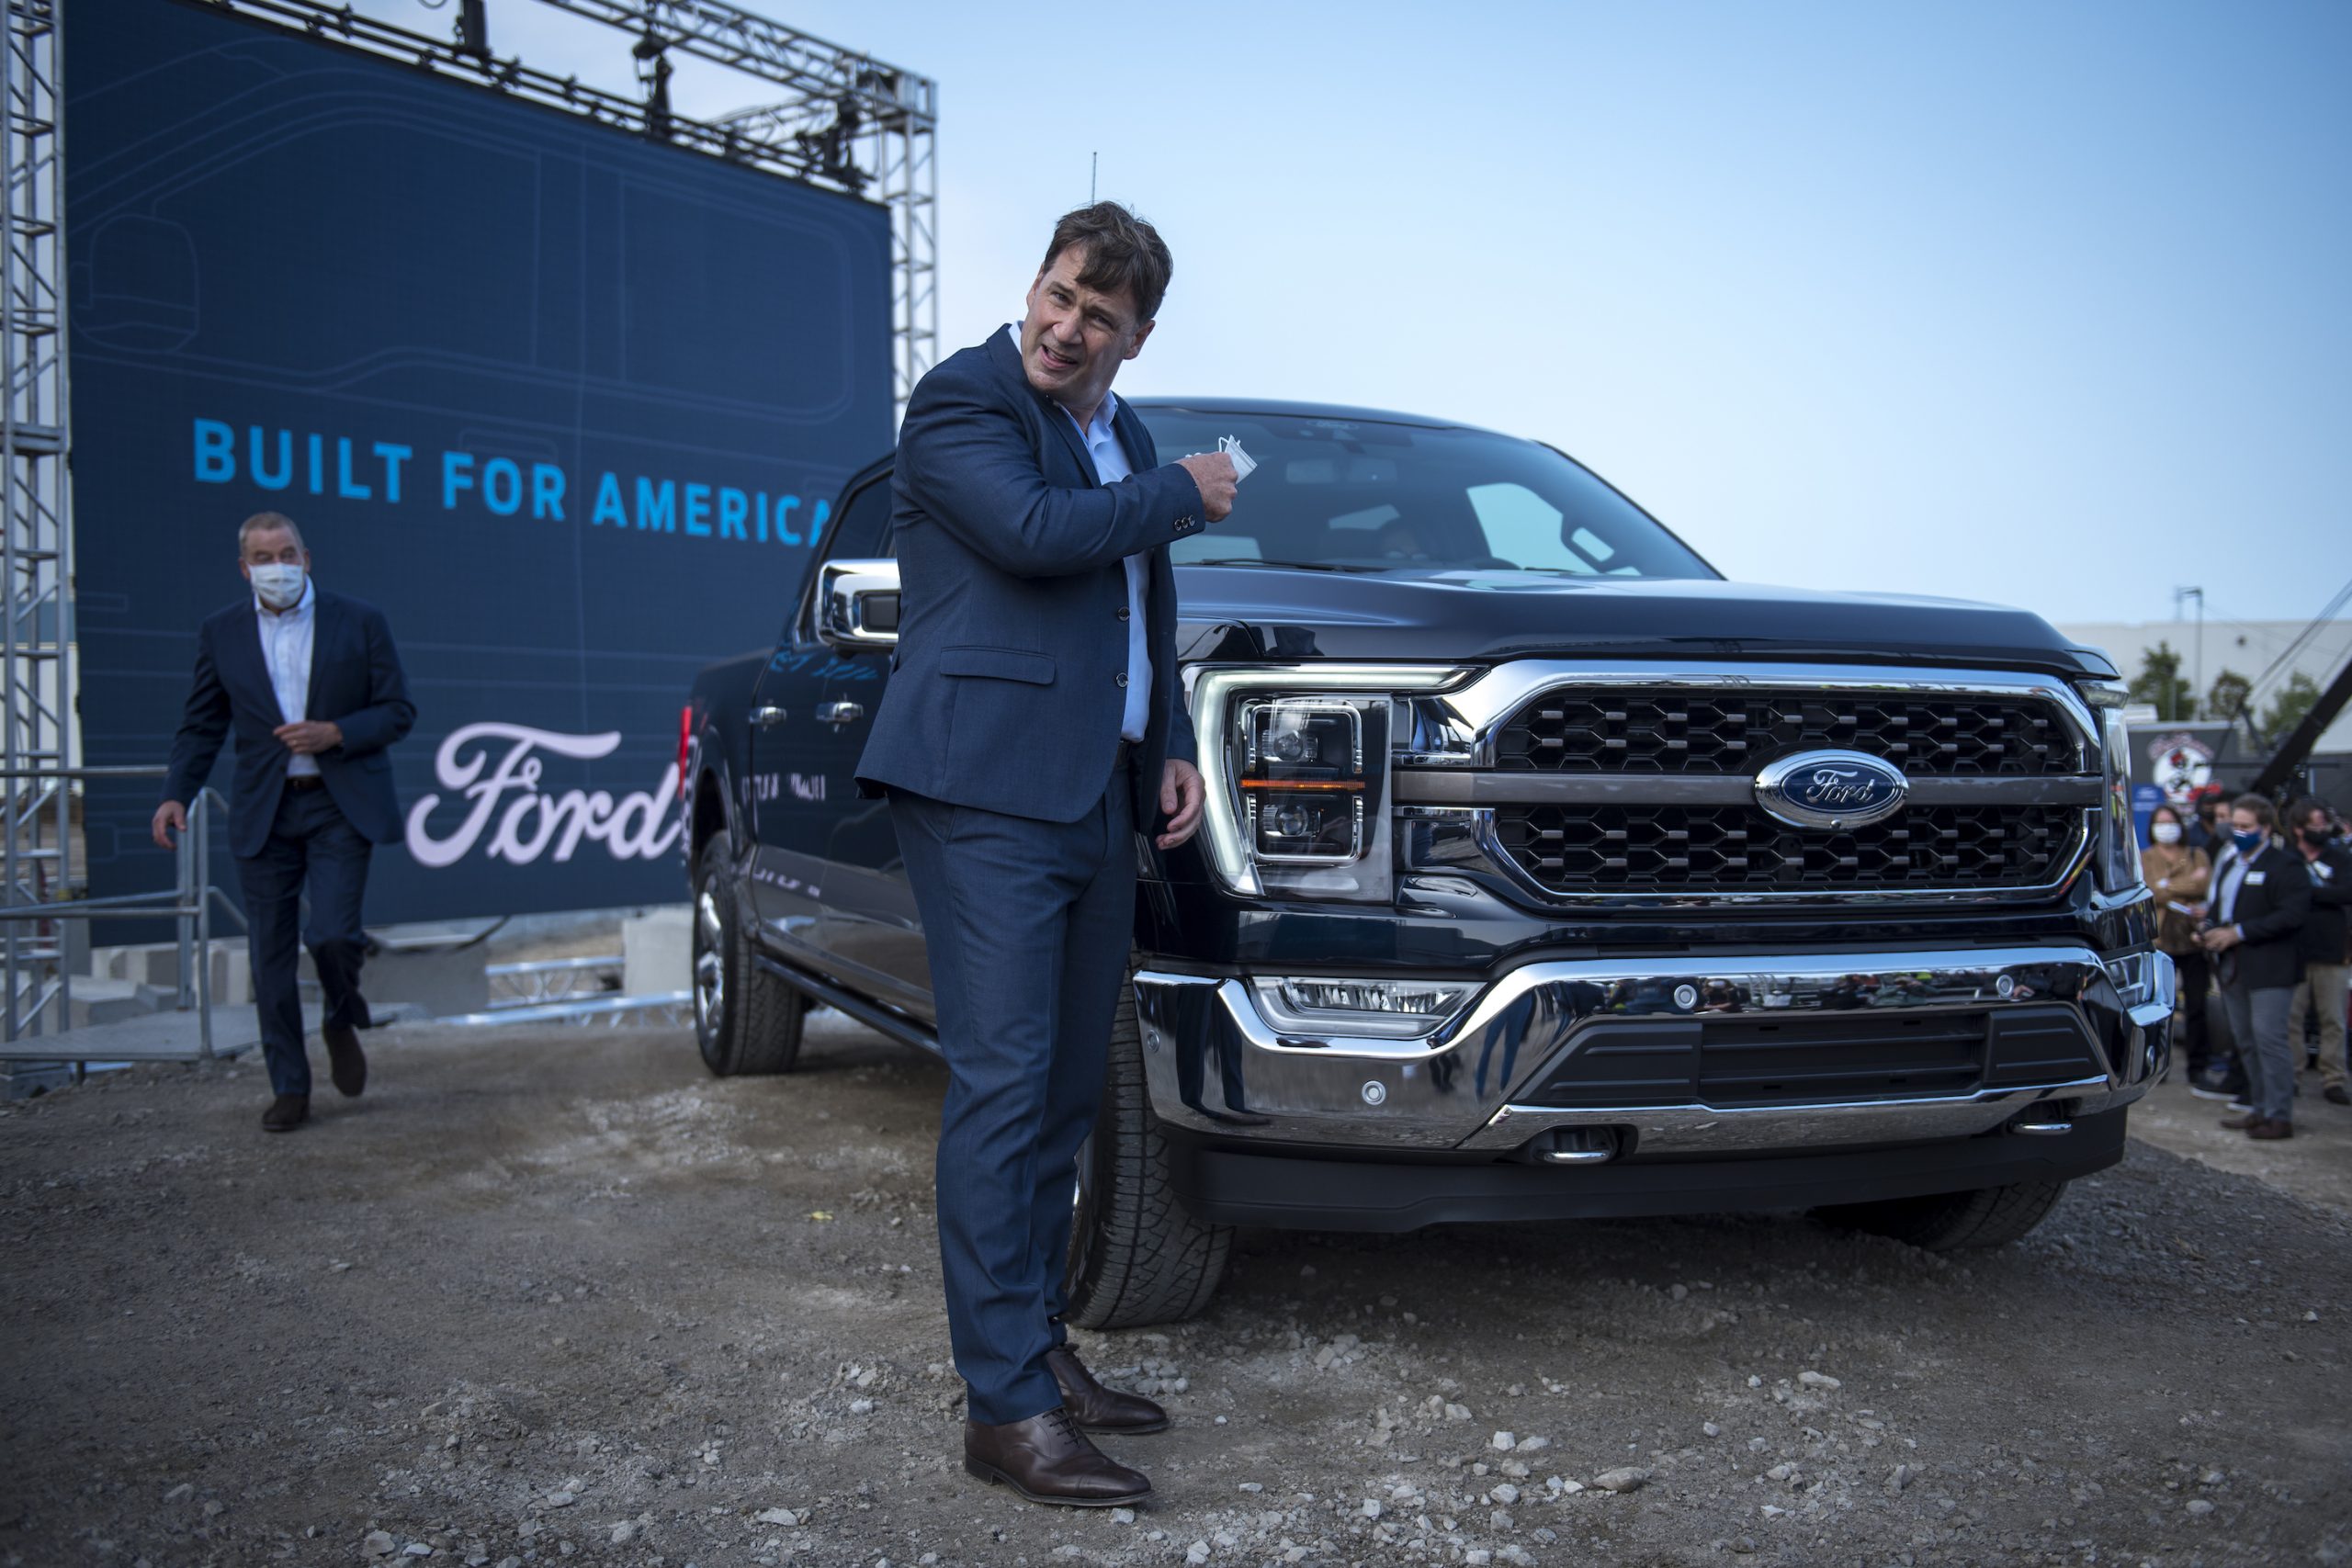 Ford CEO Jim Farley takes off his mask at the Ford Built for America event at Ford’s Dearborn Truck Plant on September 17, 2020 in Dearborn, Michigan. Ford held the event to showcase its new advertising campaign, the start of production for the new F-150 pickup truck and the future of the Dearborn Truck Plant